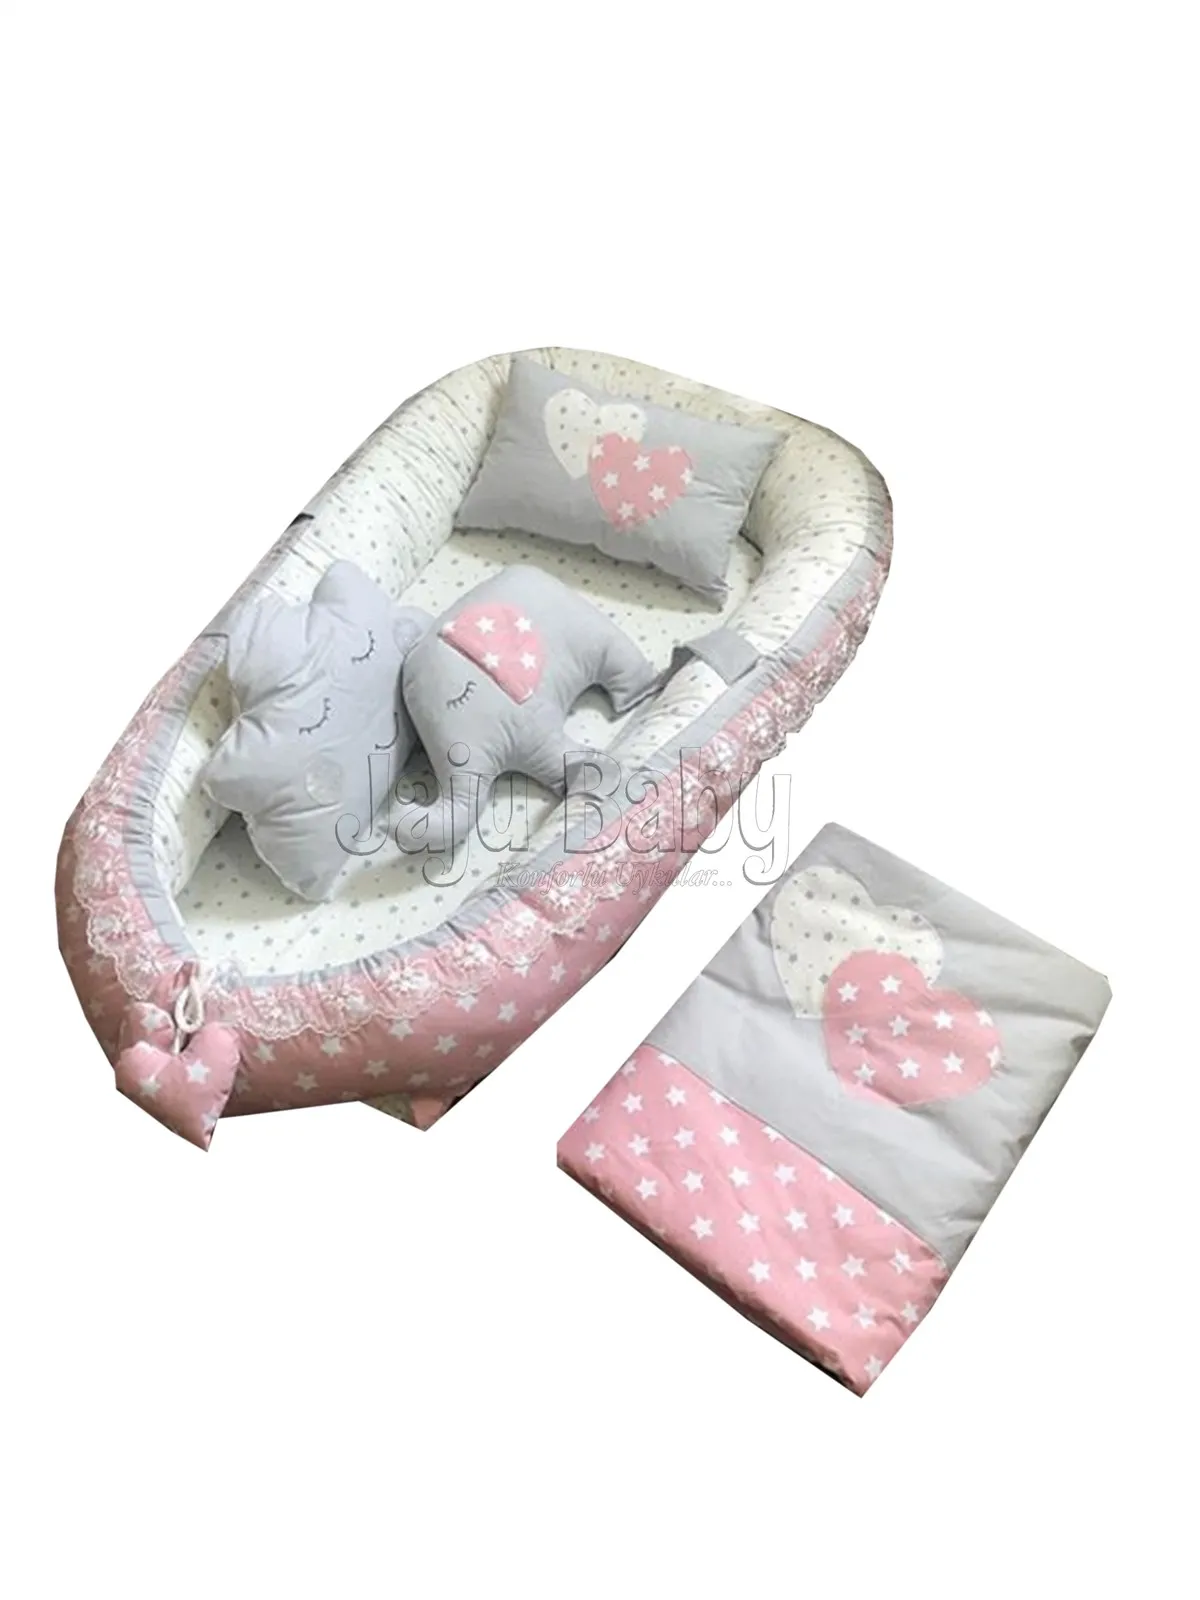 Jaju Baby Handmade, Powder Starry Pattern Gray Fabric Design Lux Orthopedic Babynest Set of 5 Mother Side Portable Baby Bed